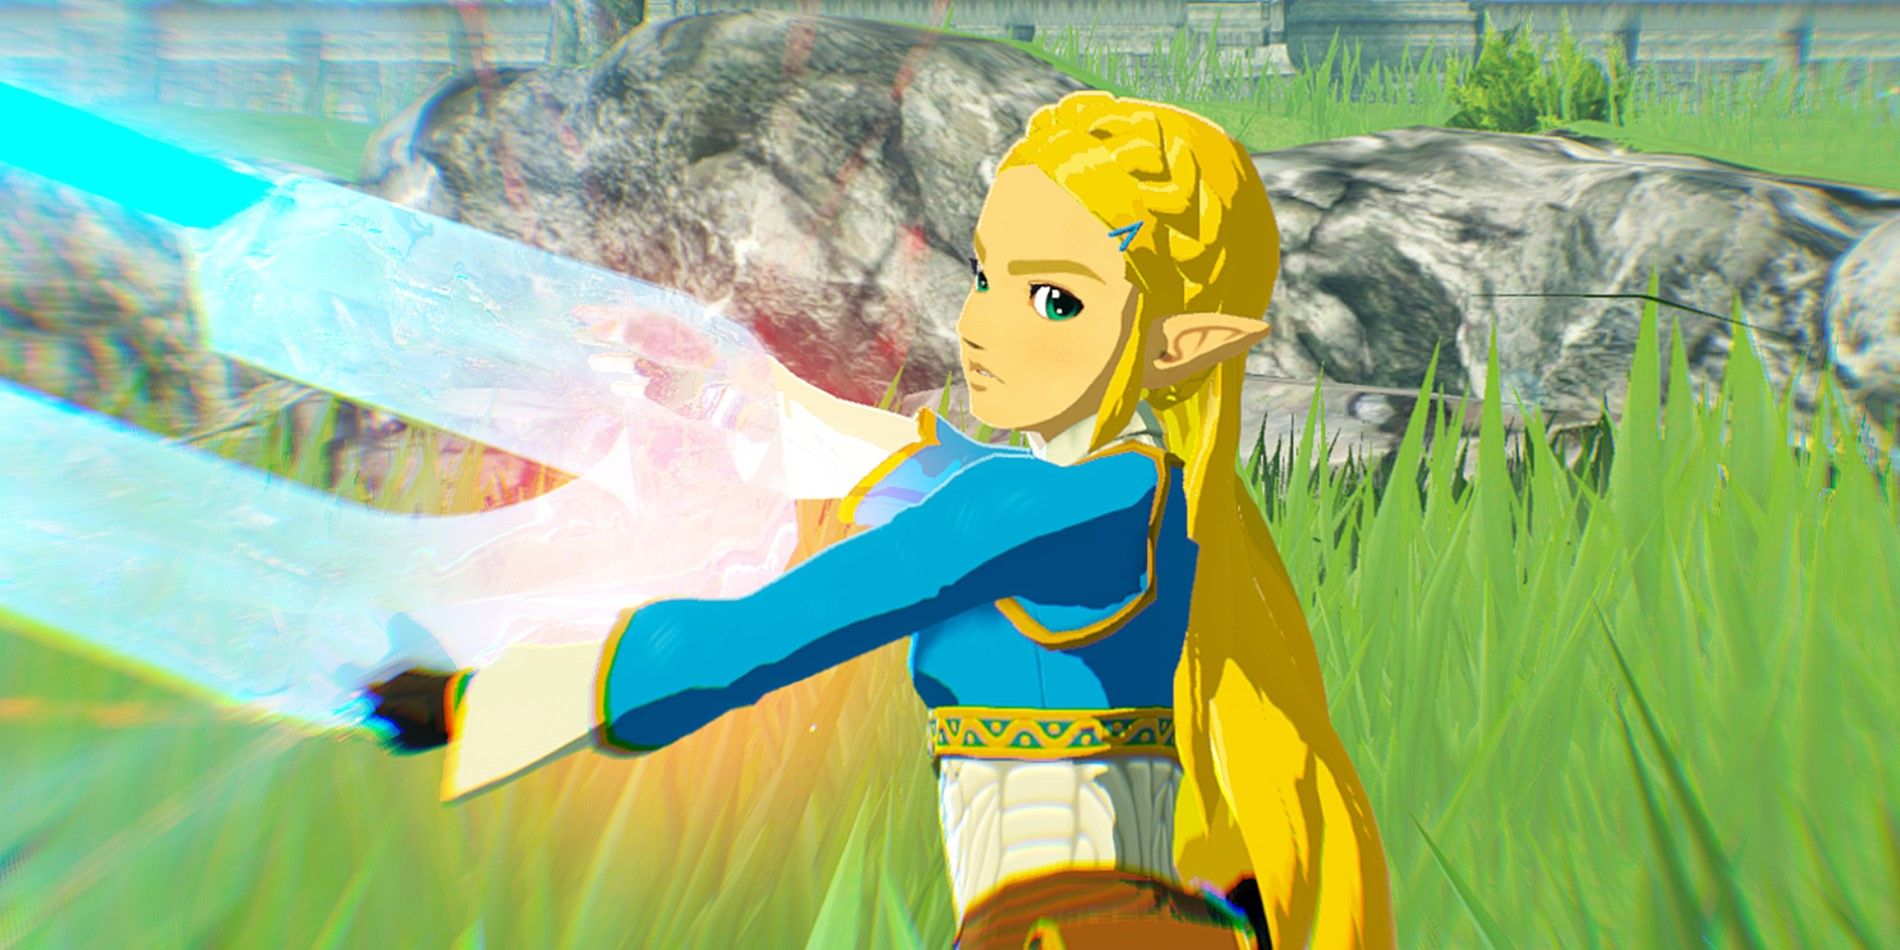 The Best Weapons For Zelda in Hyrule Warriors Age of Calamity